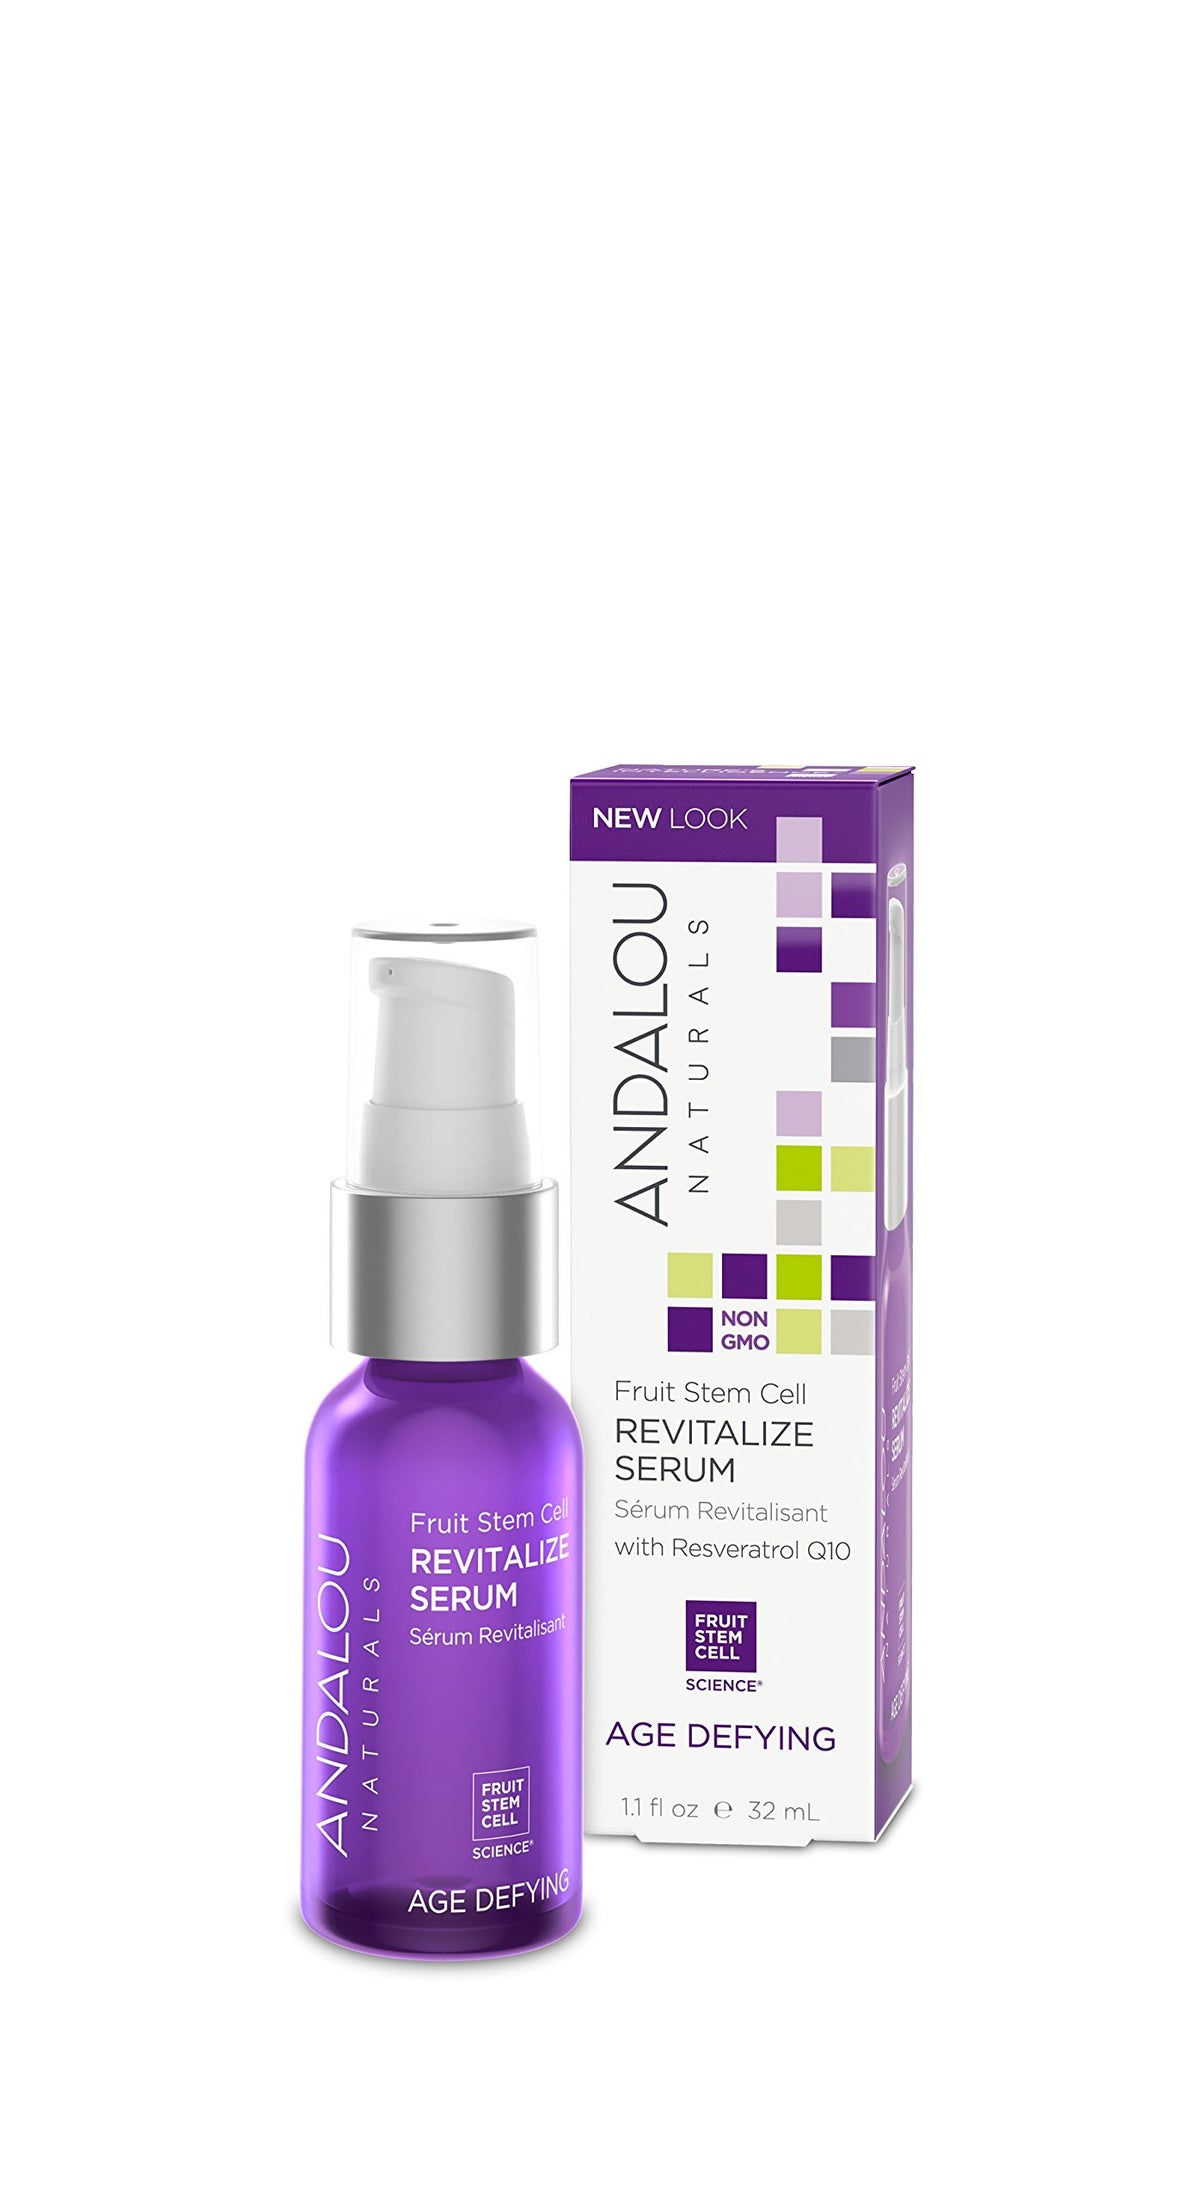 Andalou Naturals AGE DEFYING Fruit Stem Cell Revitalize Serum, Purple Bottle, 32.5 ml (Pack of 1), (43755)